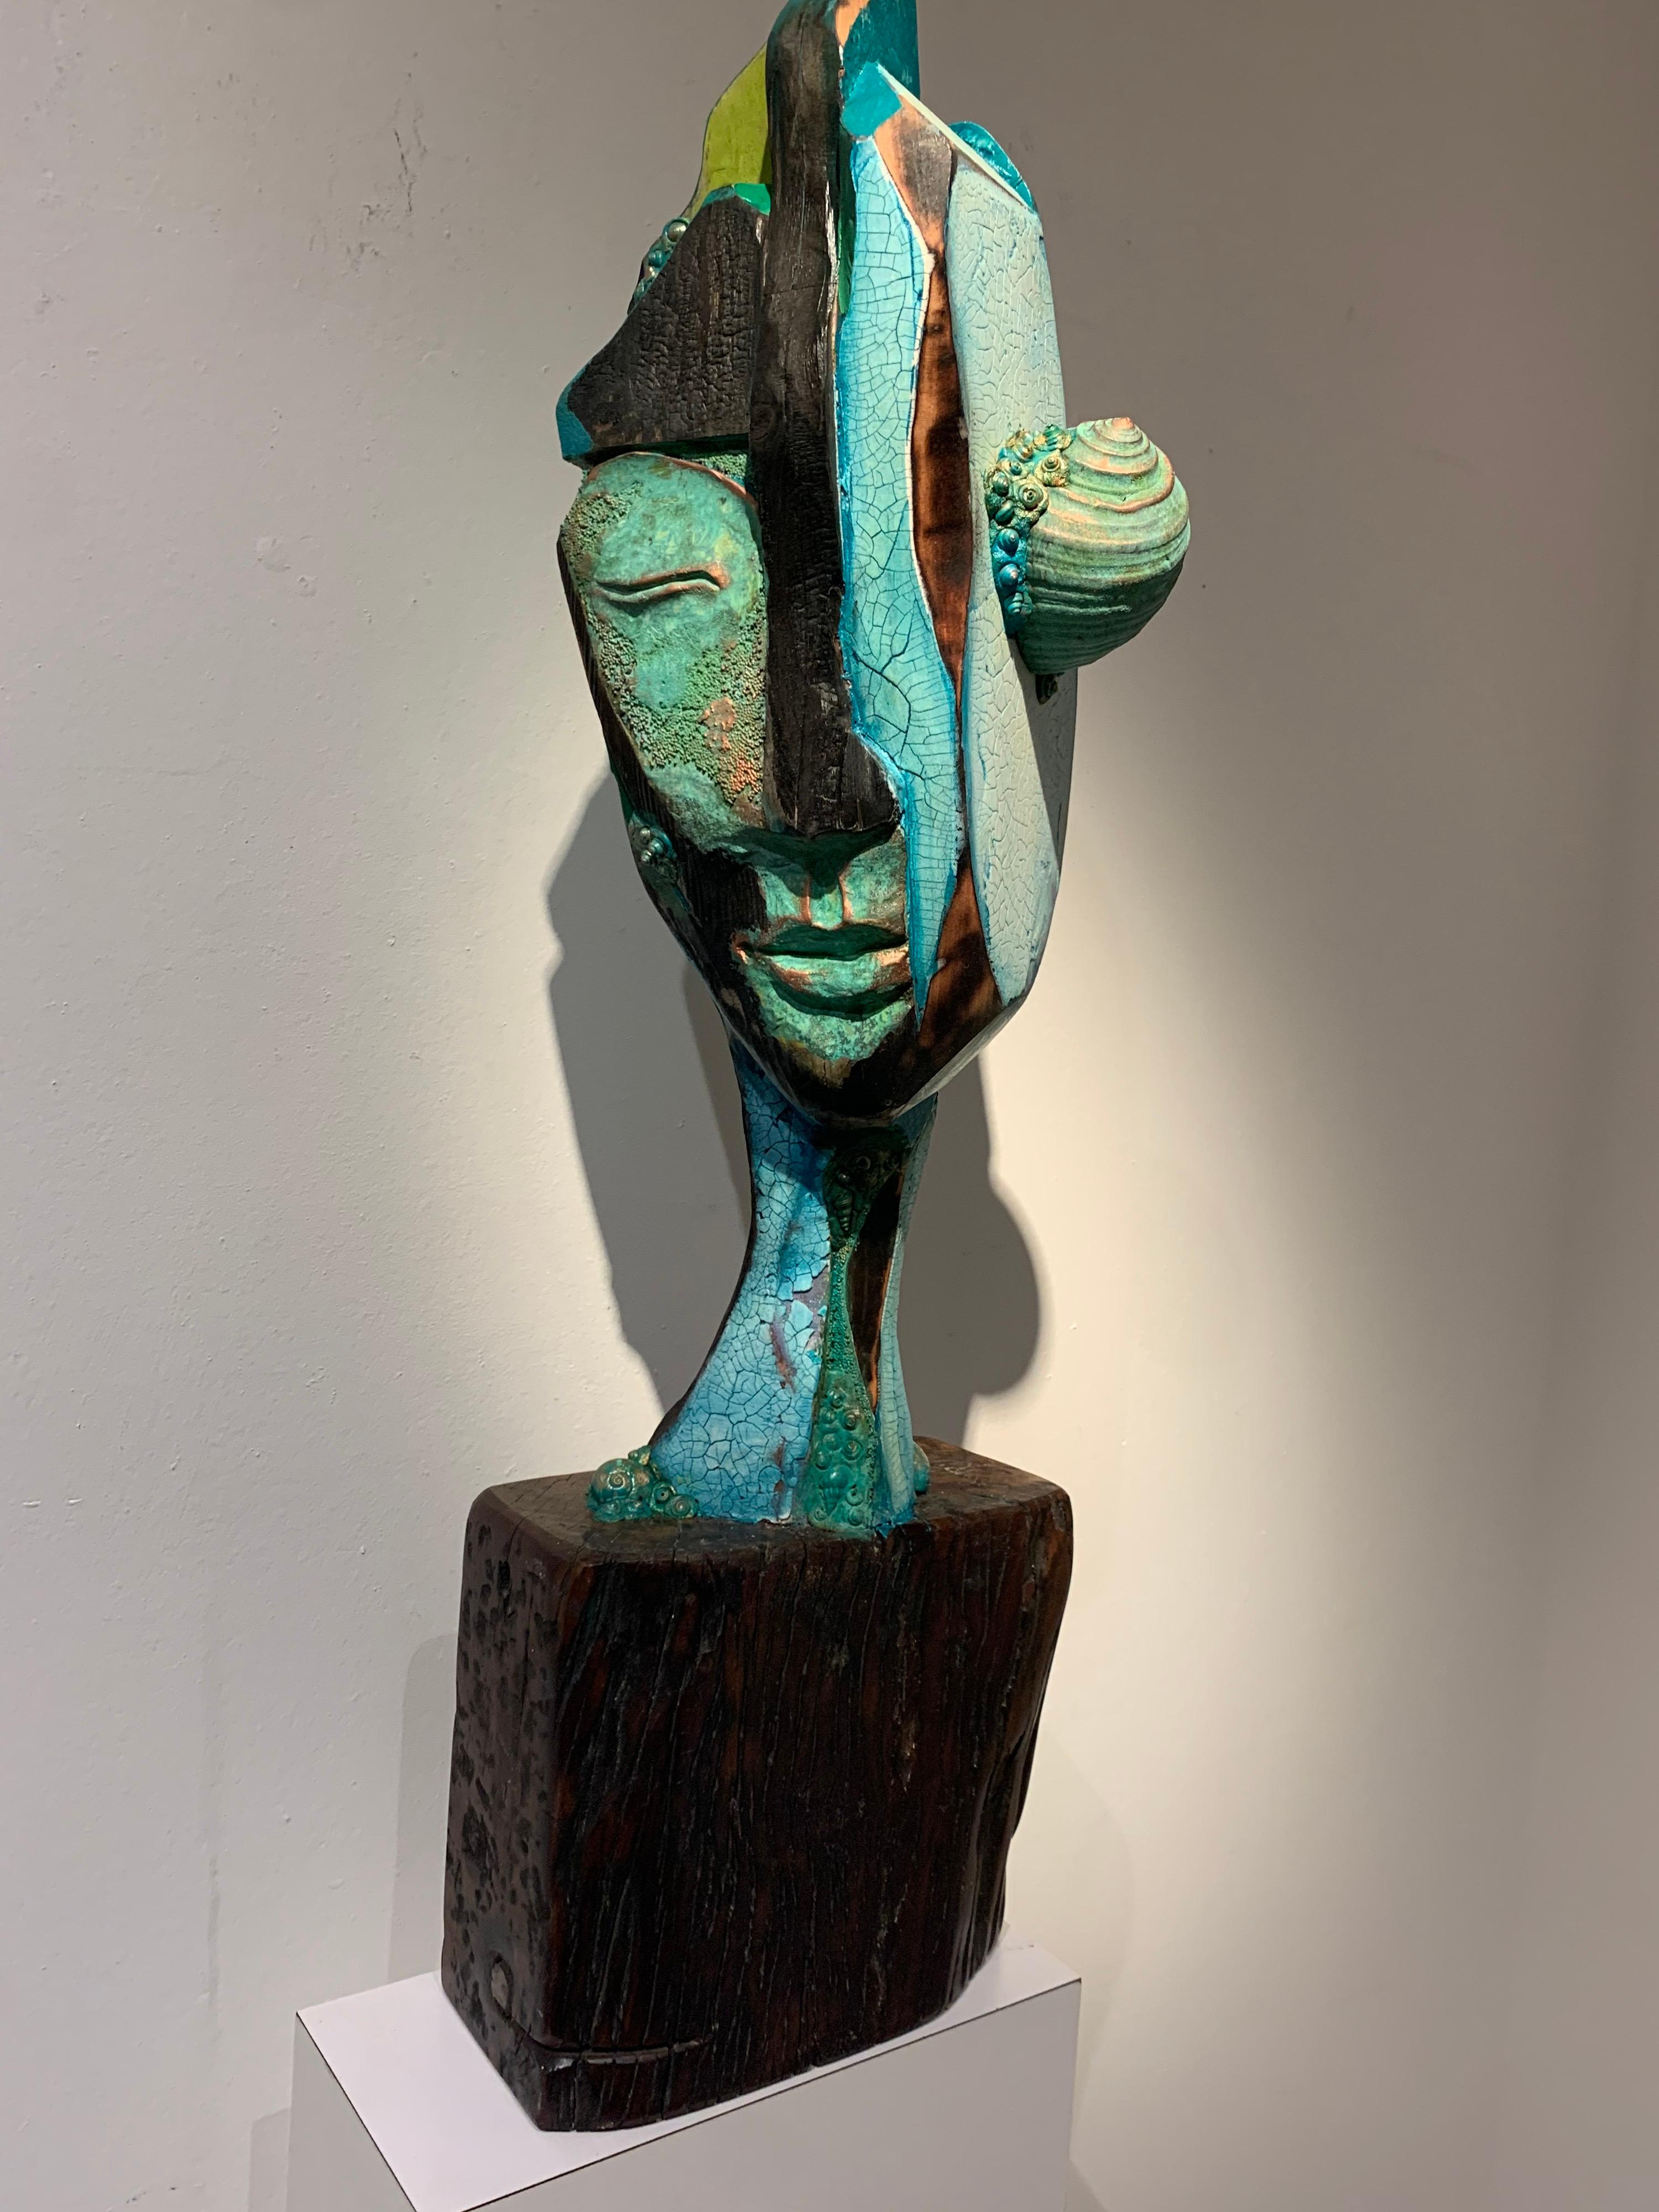 Listening, wood, acrylic, mixed media sculpture, green, blue, off white, brown 5